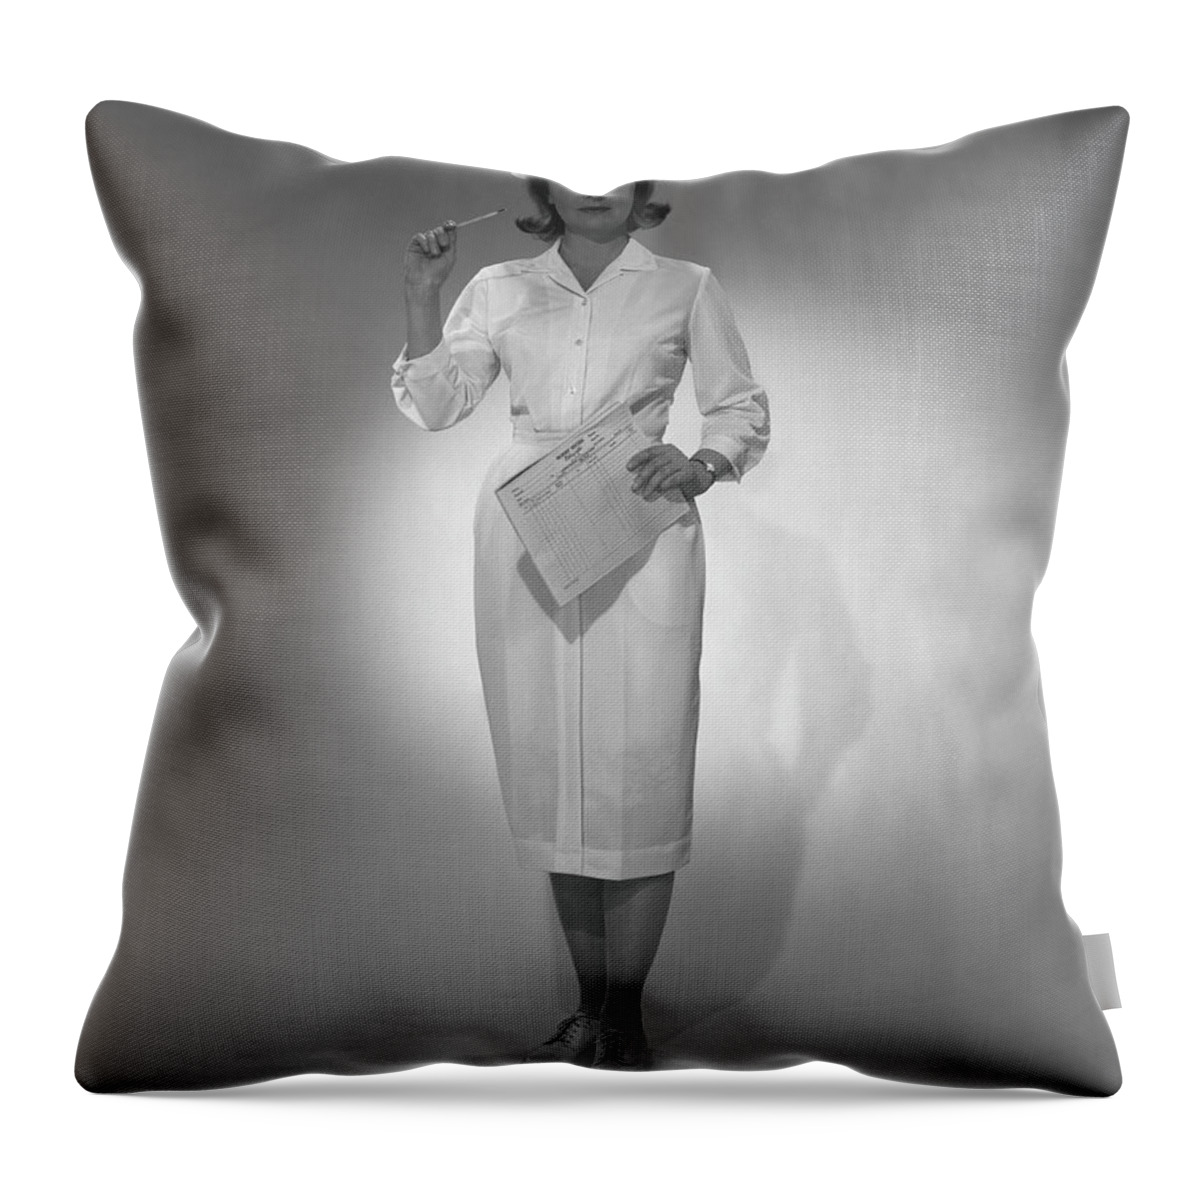 Mid Adult Women Throw Pillow featuring the photograph Nurse Holding Medical Chart Posing In by George Marks